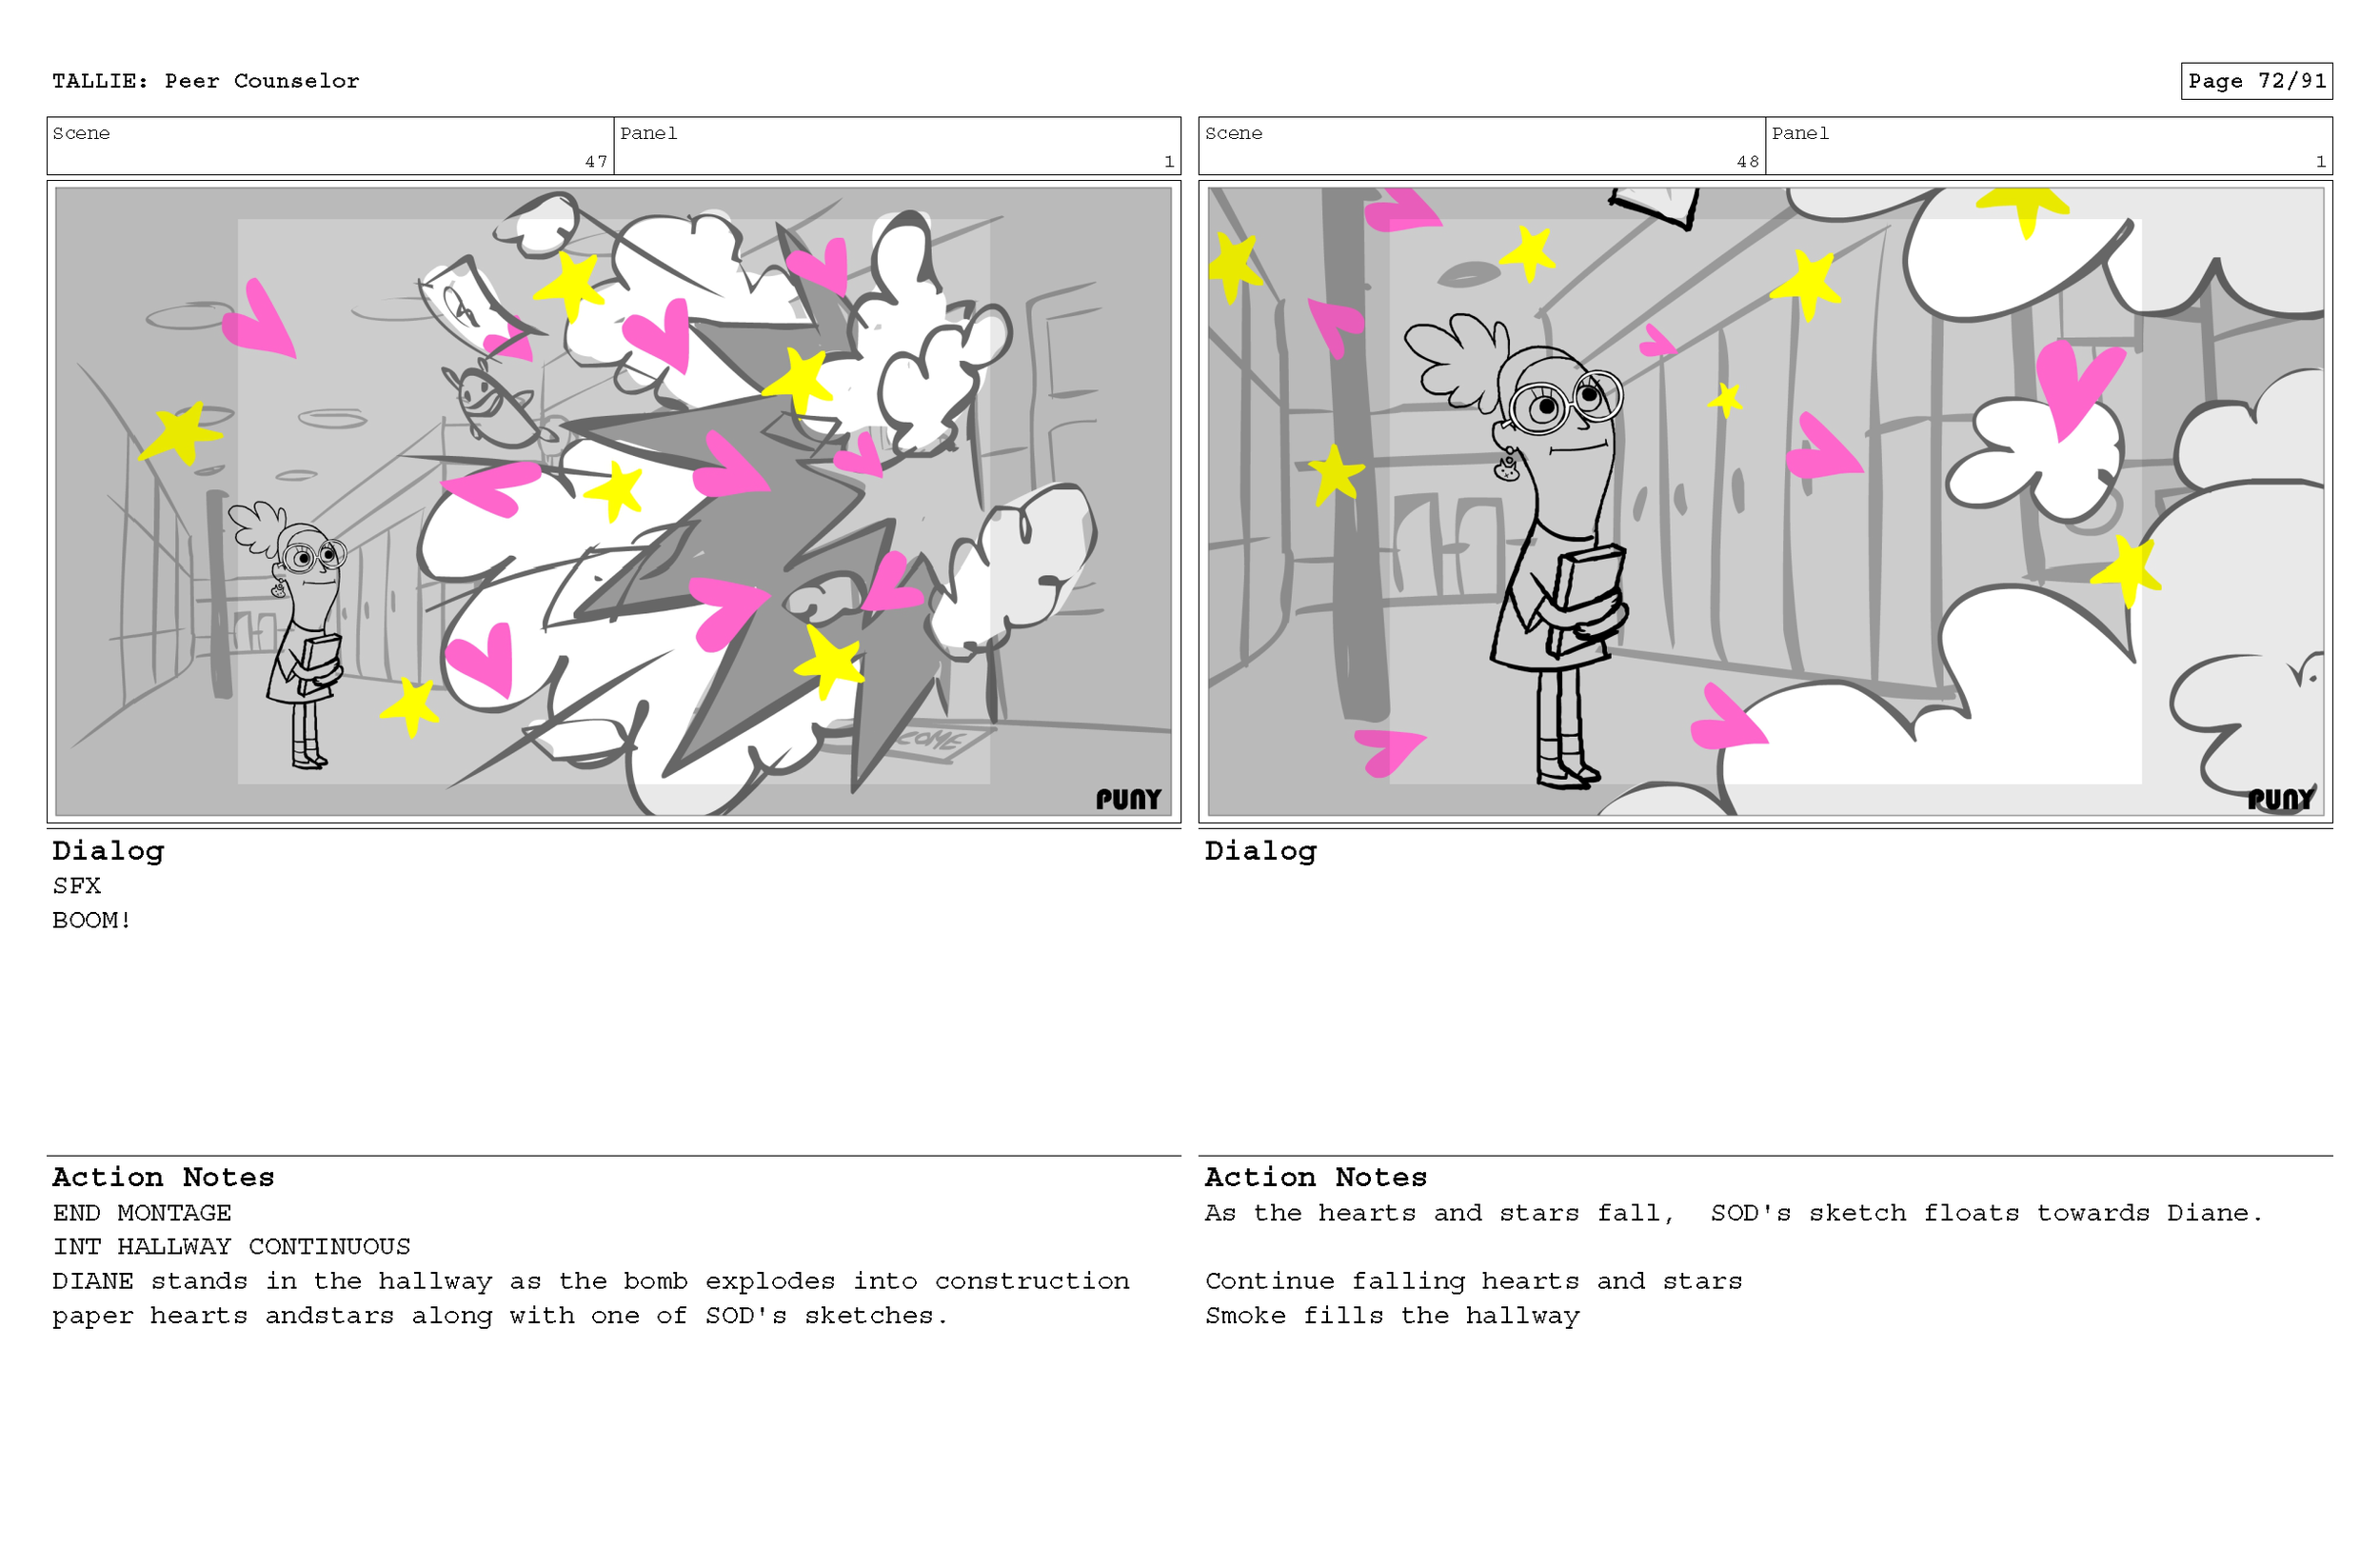 MikeOwens_STORYBOARDS_TallieSilverman_Page_73.png